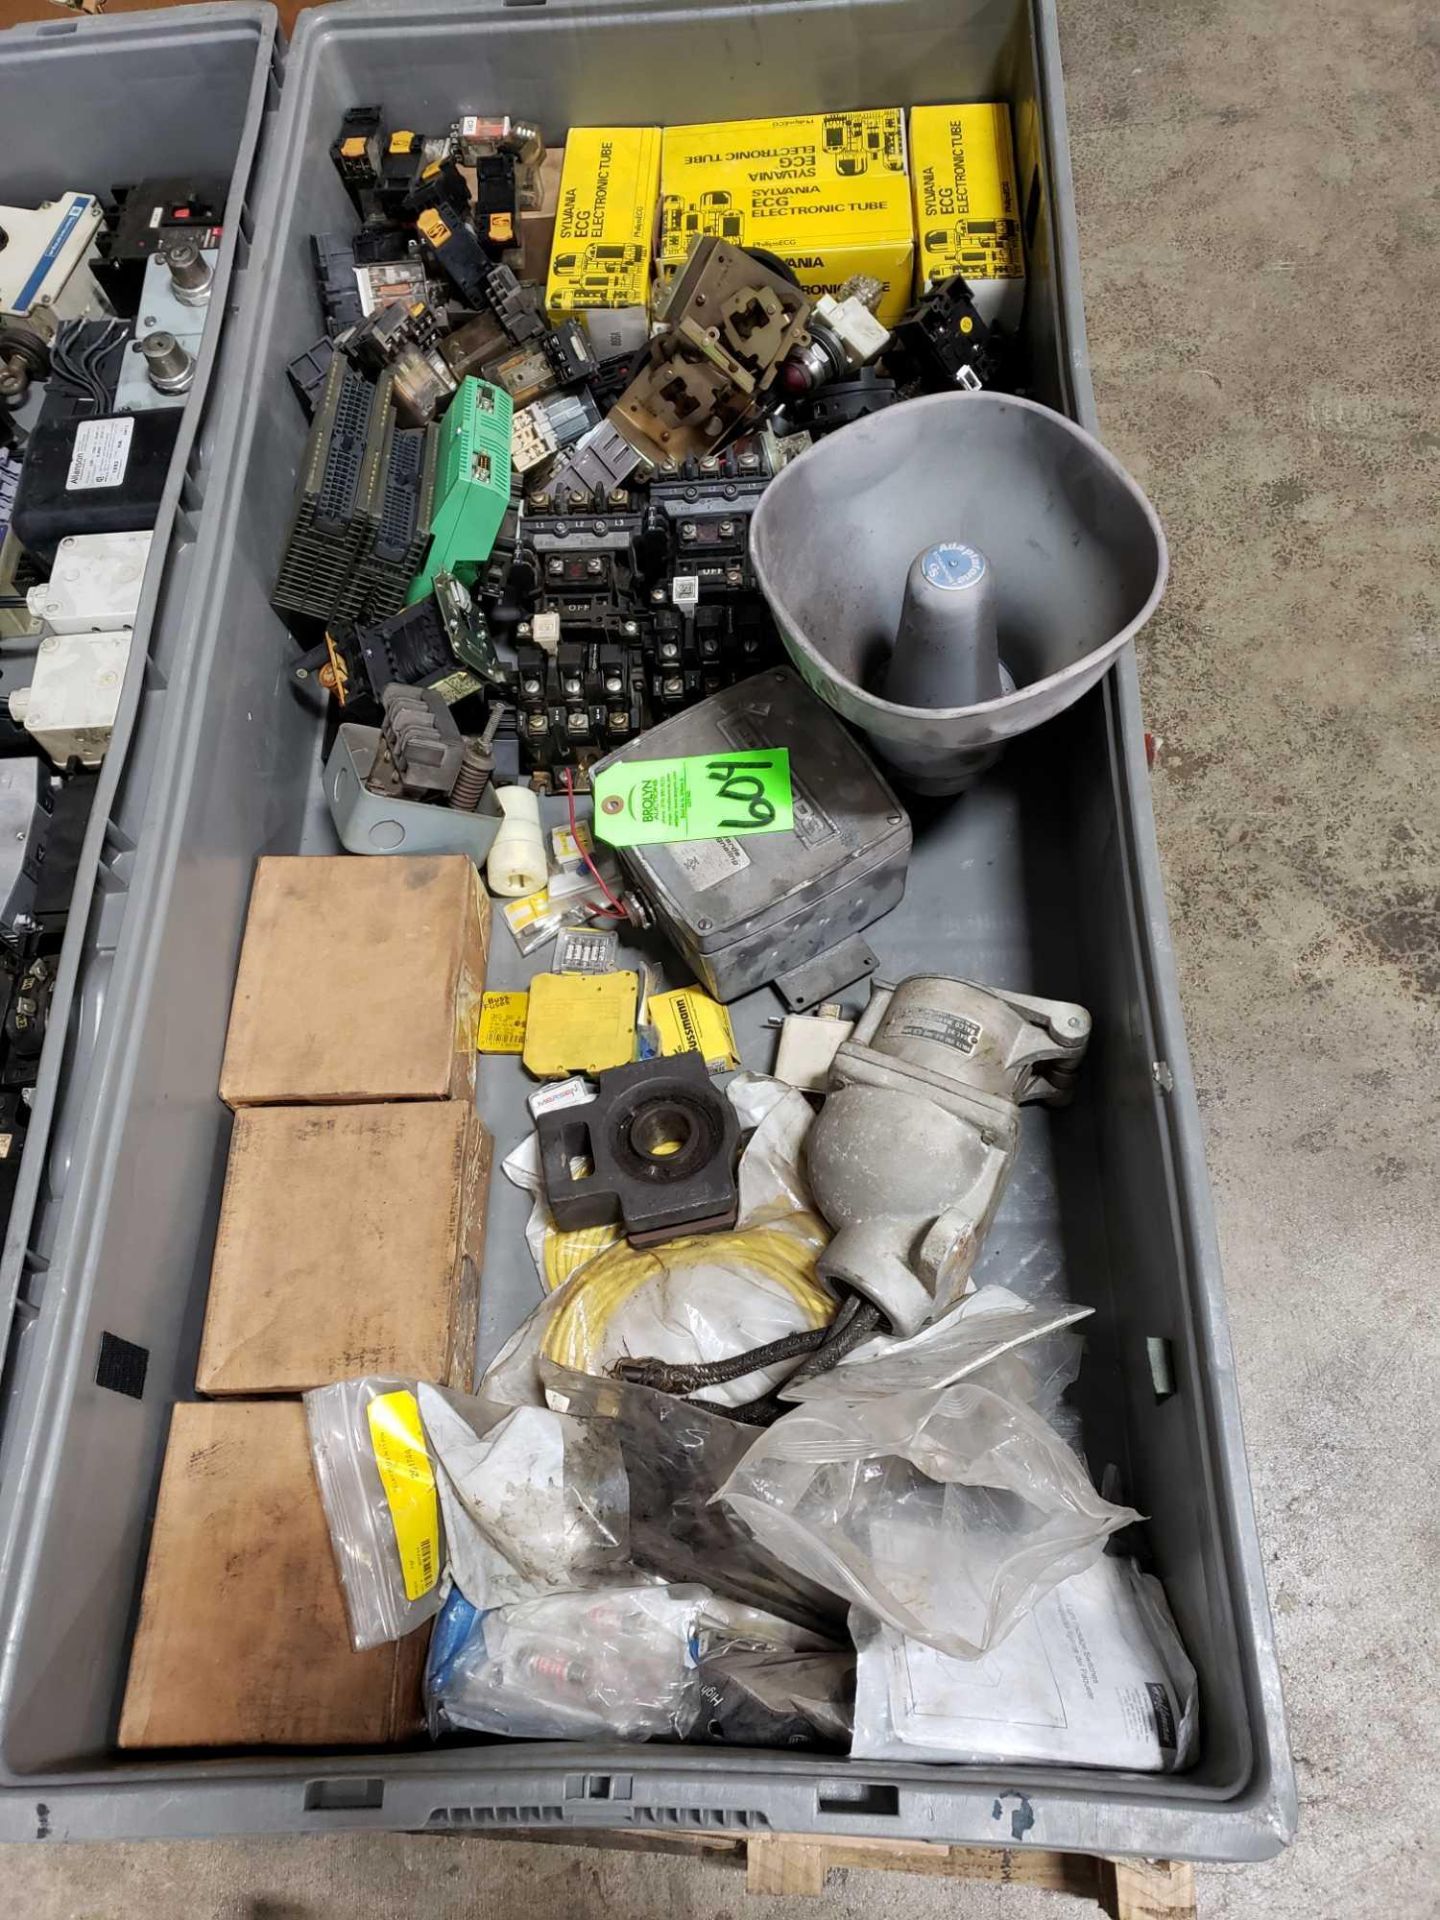 Bin of assorted parts and electrical.